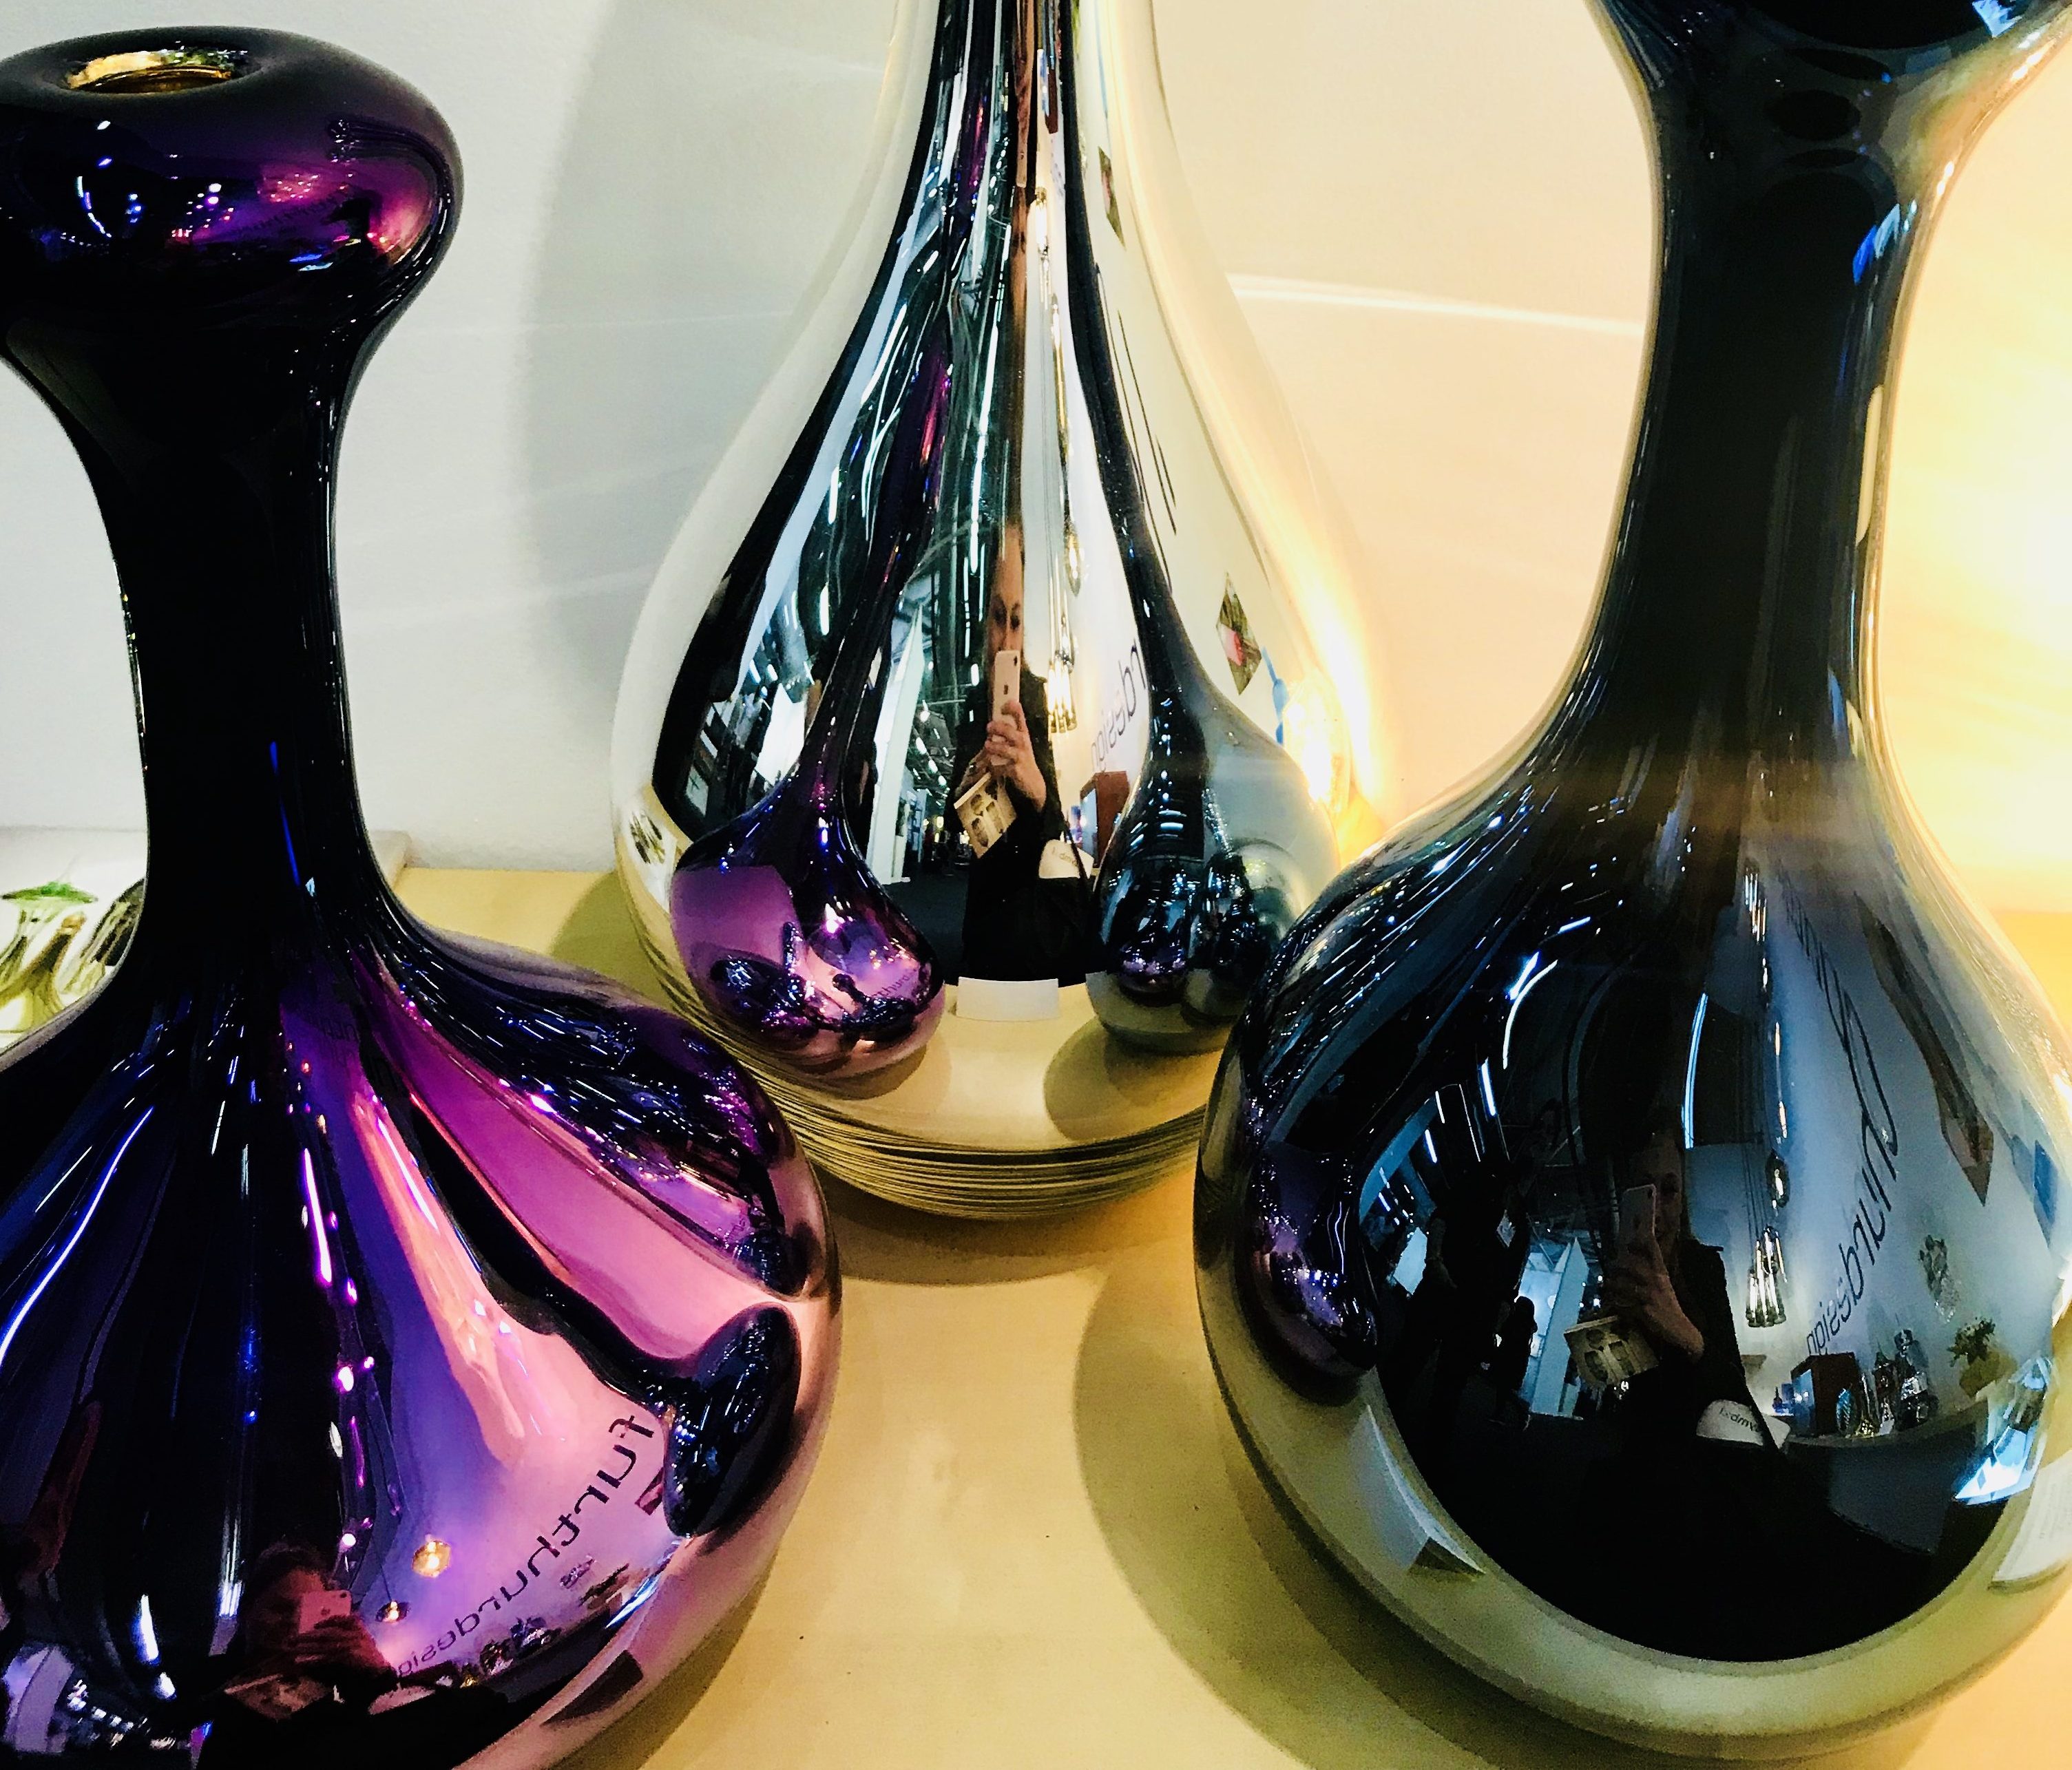 Glassblower William Couig transforms the material into fabulous, shiny metallic-coated vessels.